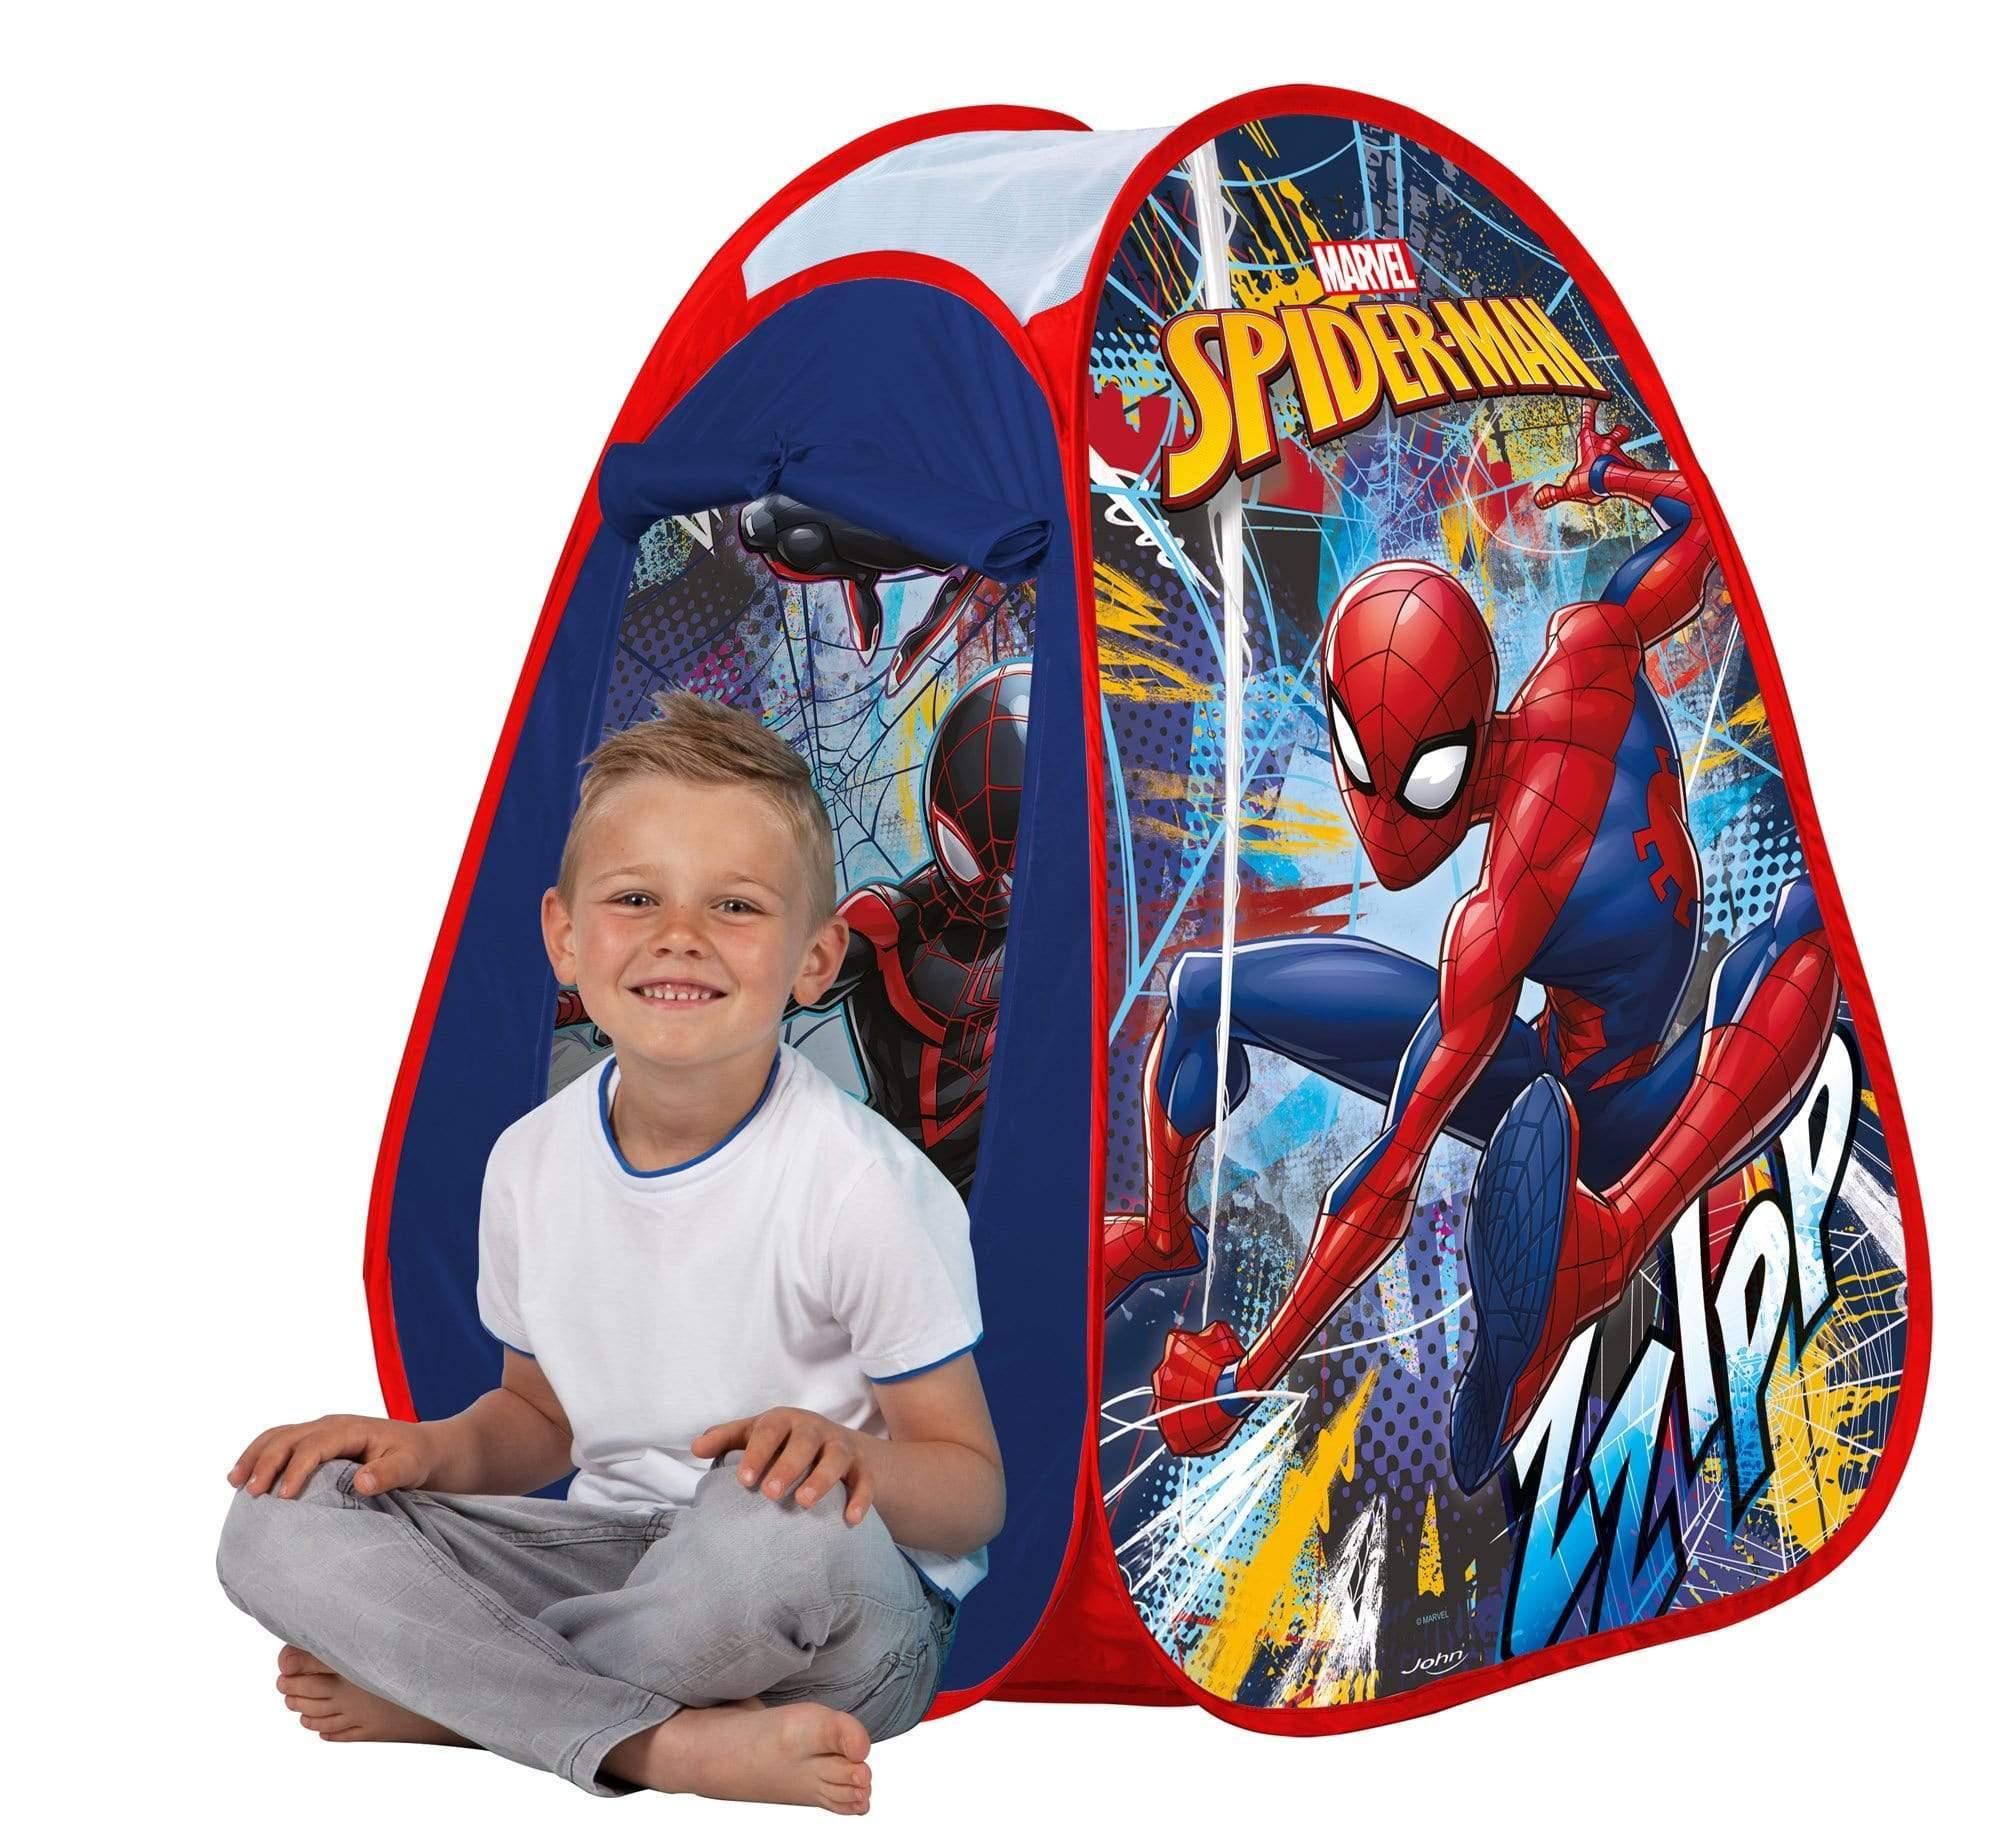 john spiderman pop up play tent in a display box